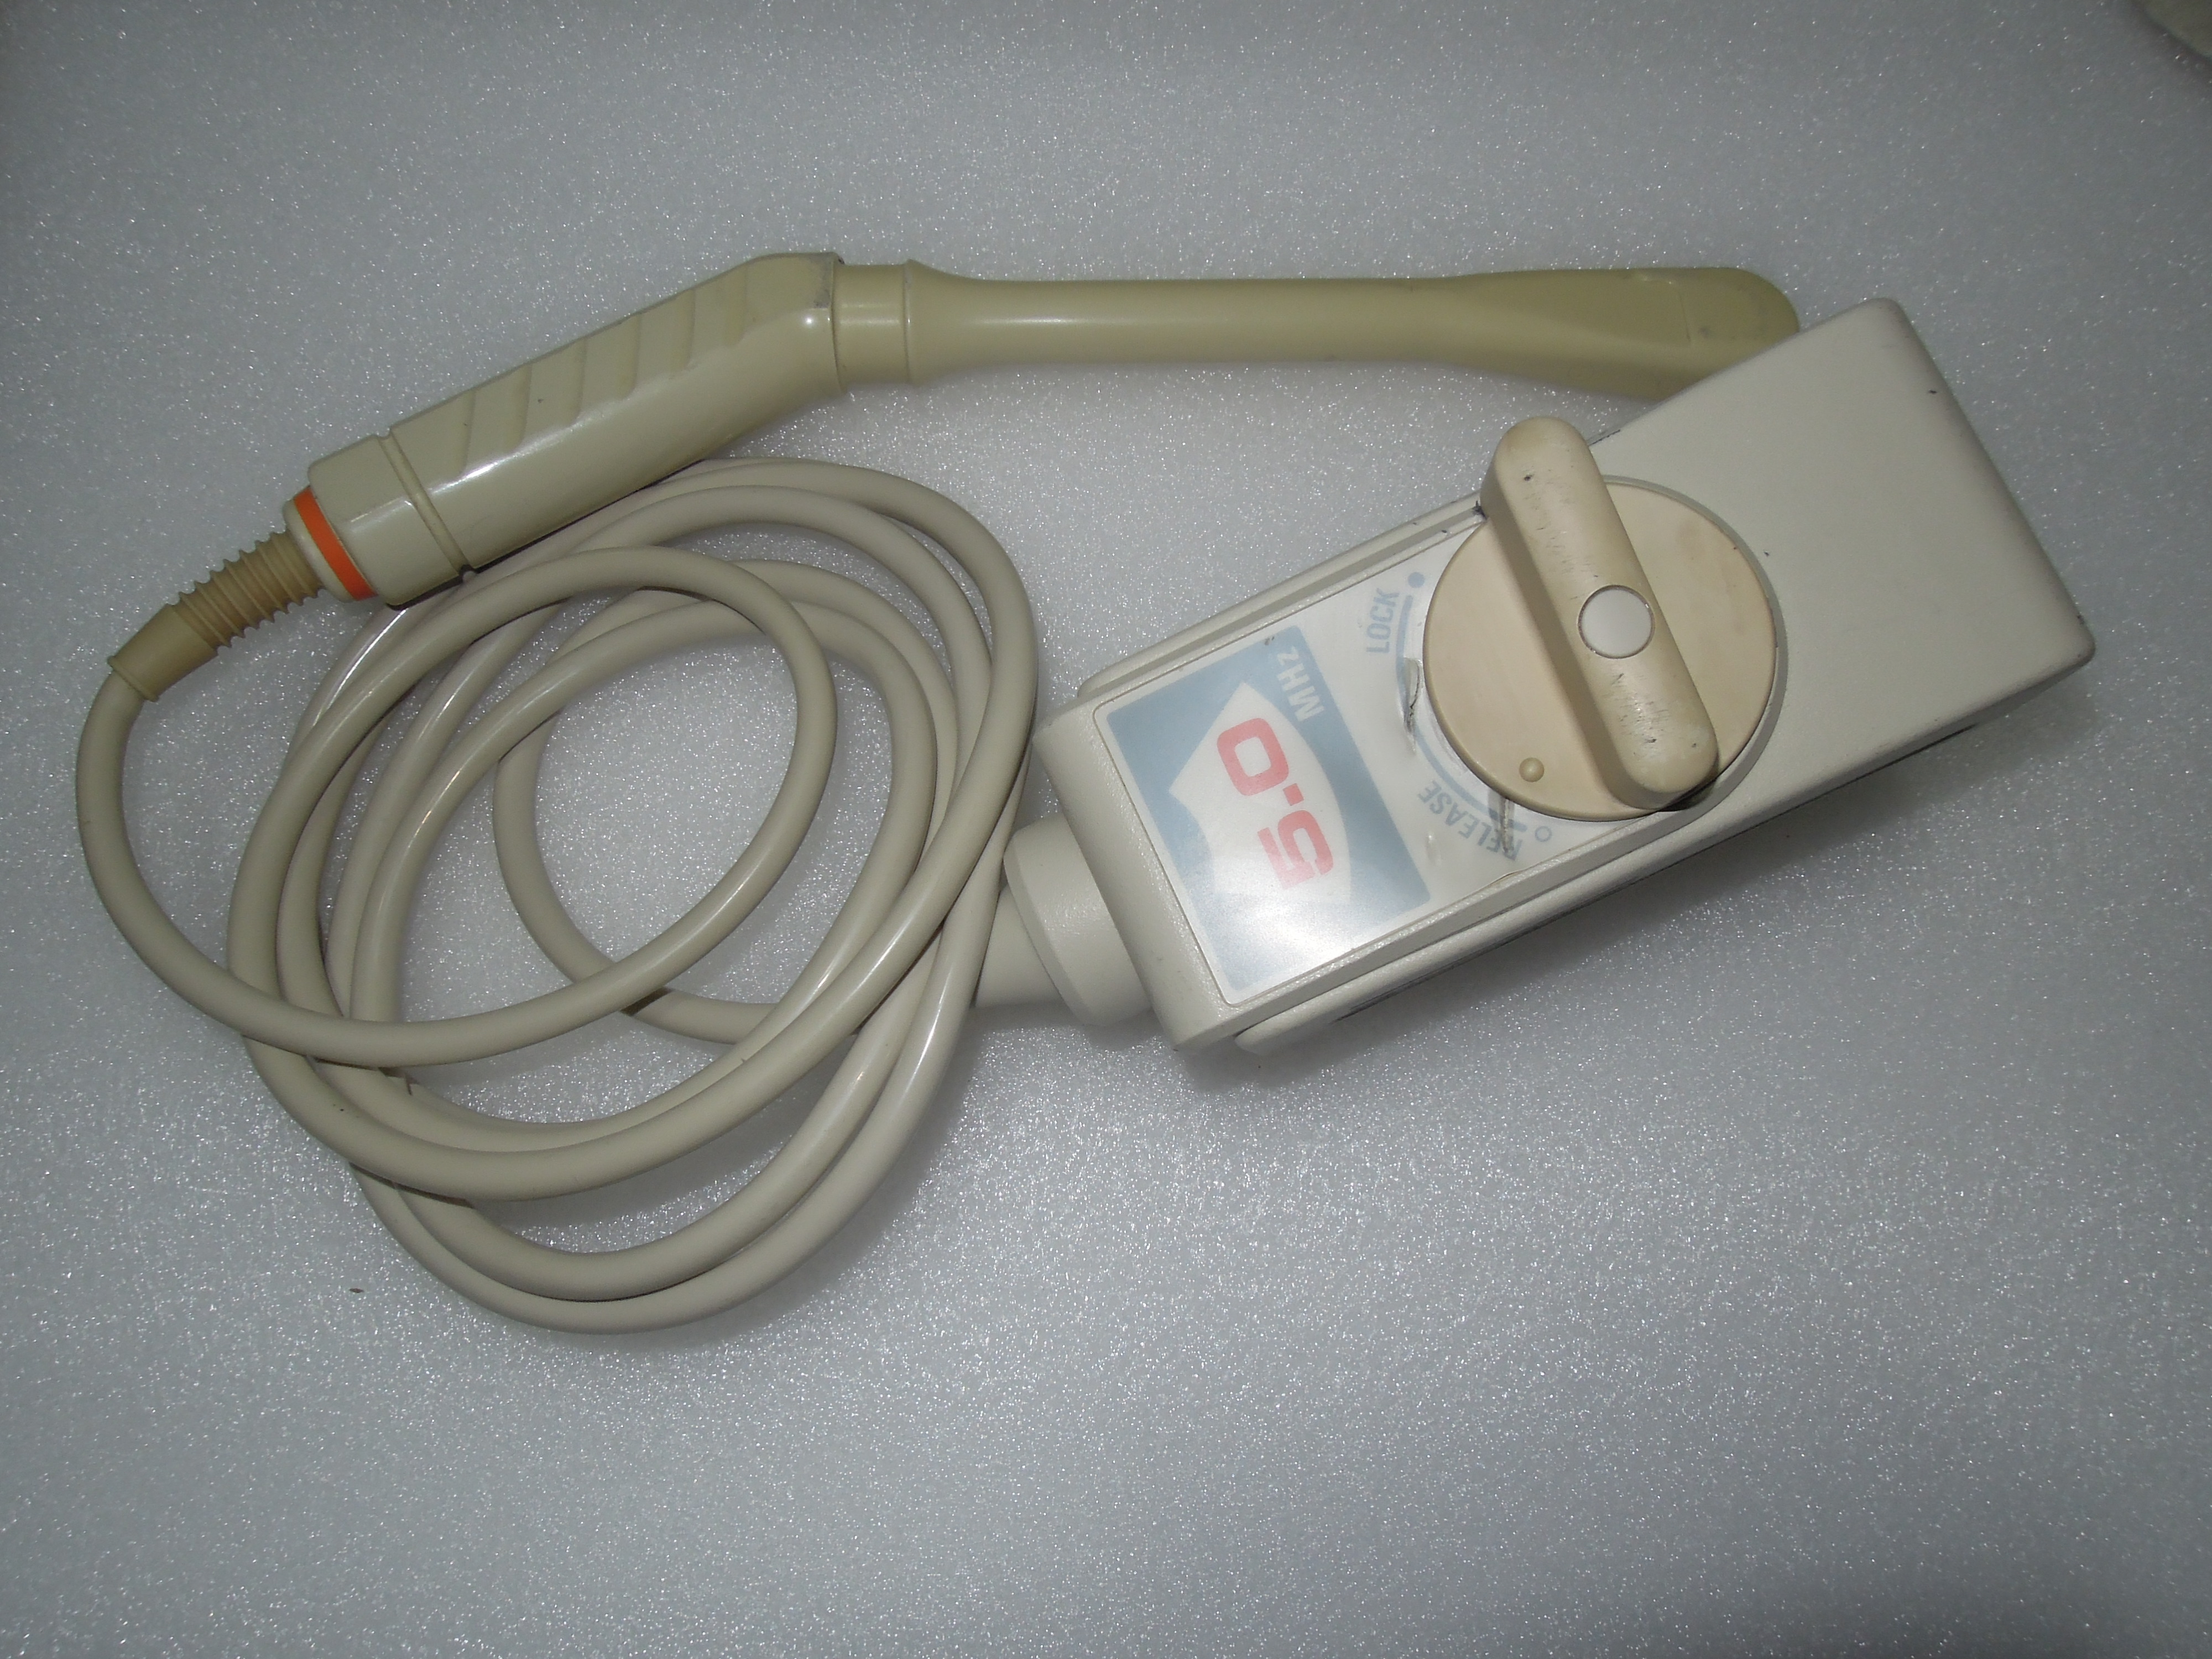 Aloka UST-984-5 multi-frequency convex endovaginal transducer